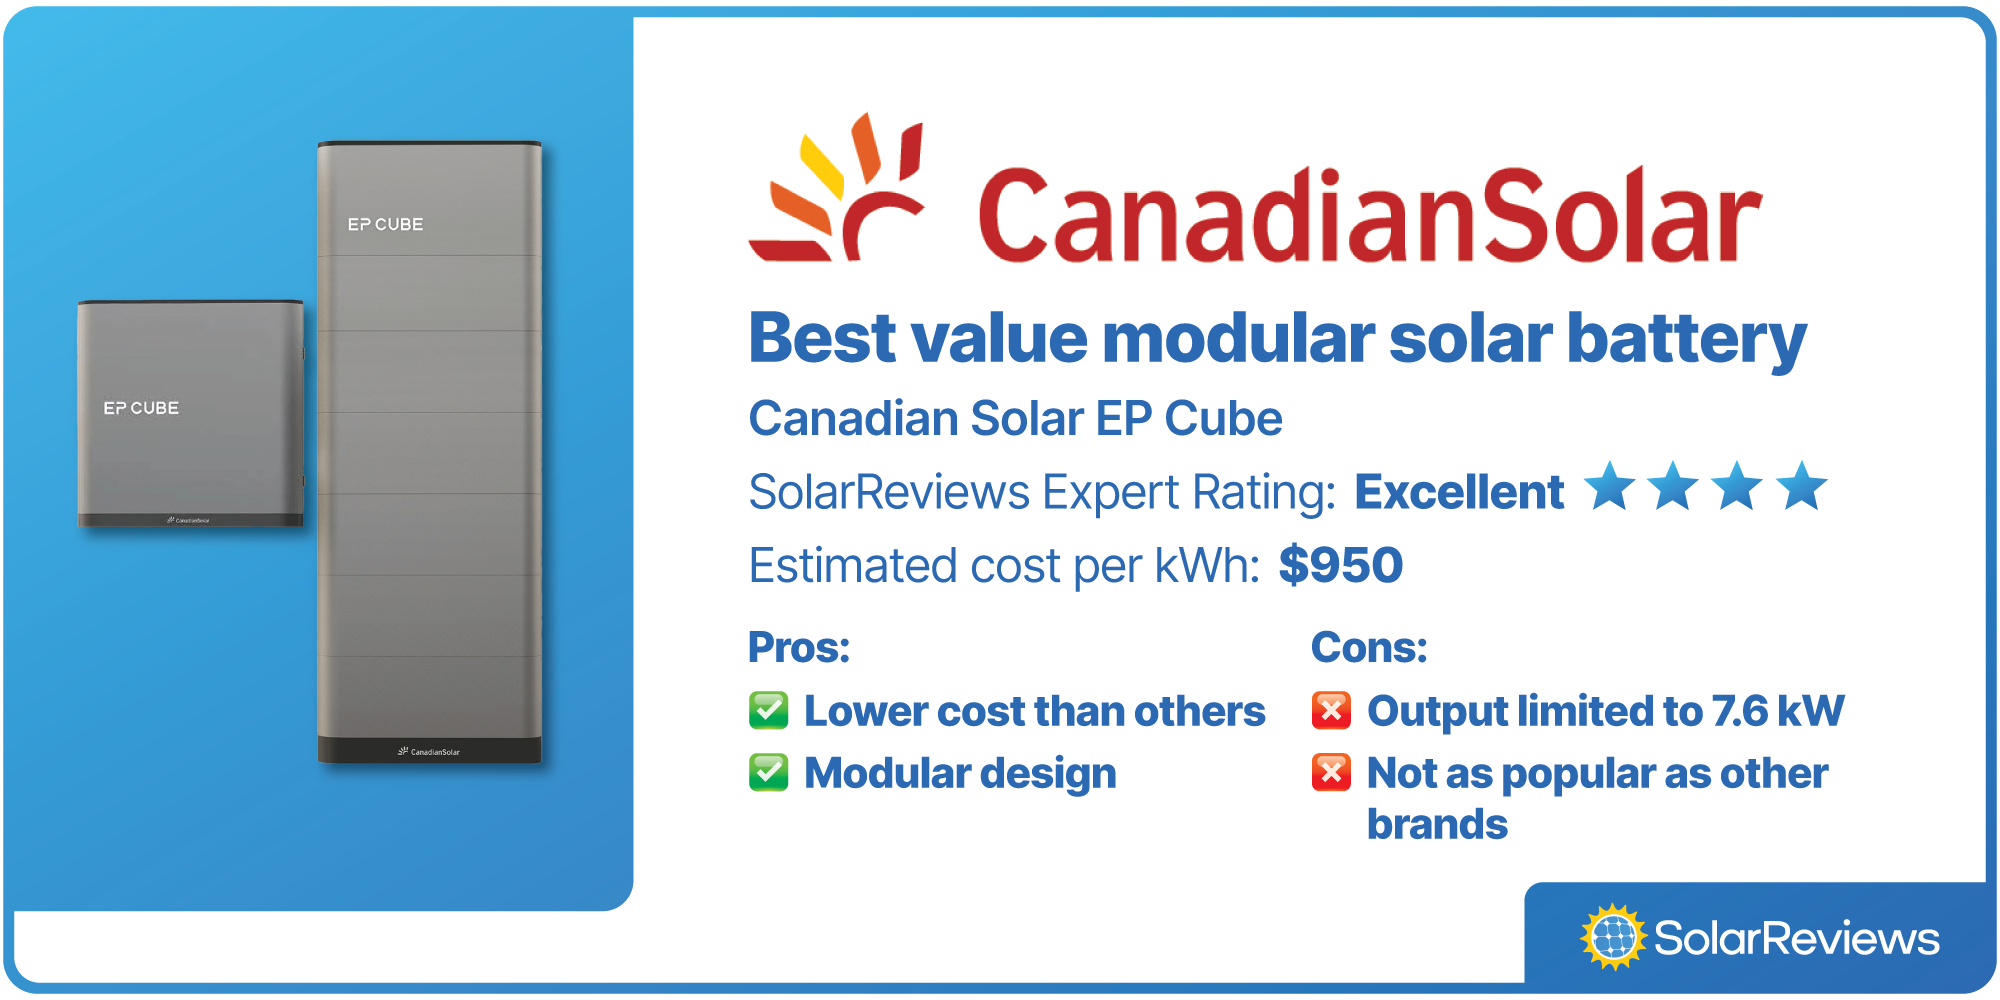 Canadian Solar EP Cube was voted best value modular solar battery, with a SolarReviews rating of Excellent (4 stars), and estimated cost per kWh of $950.
